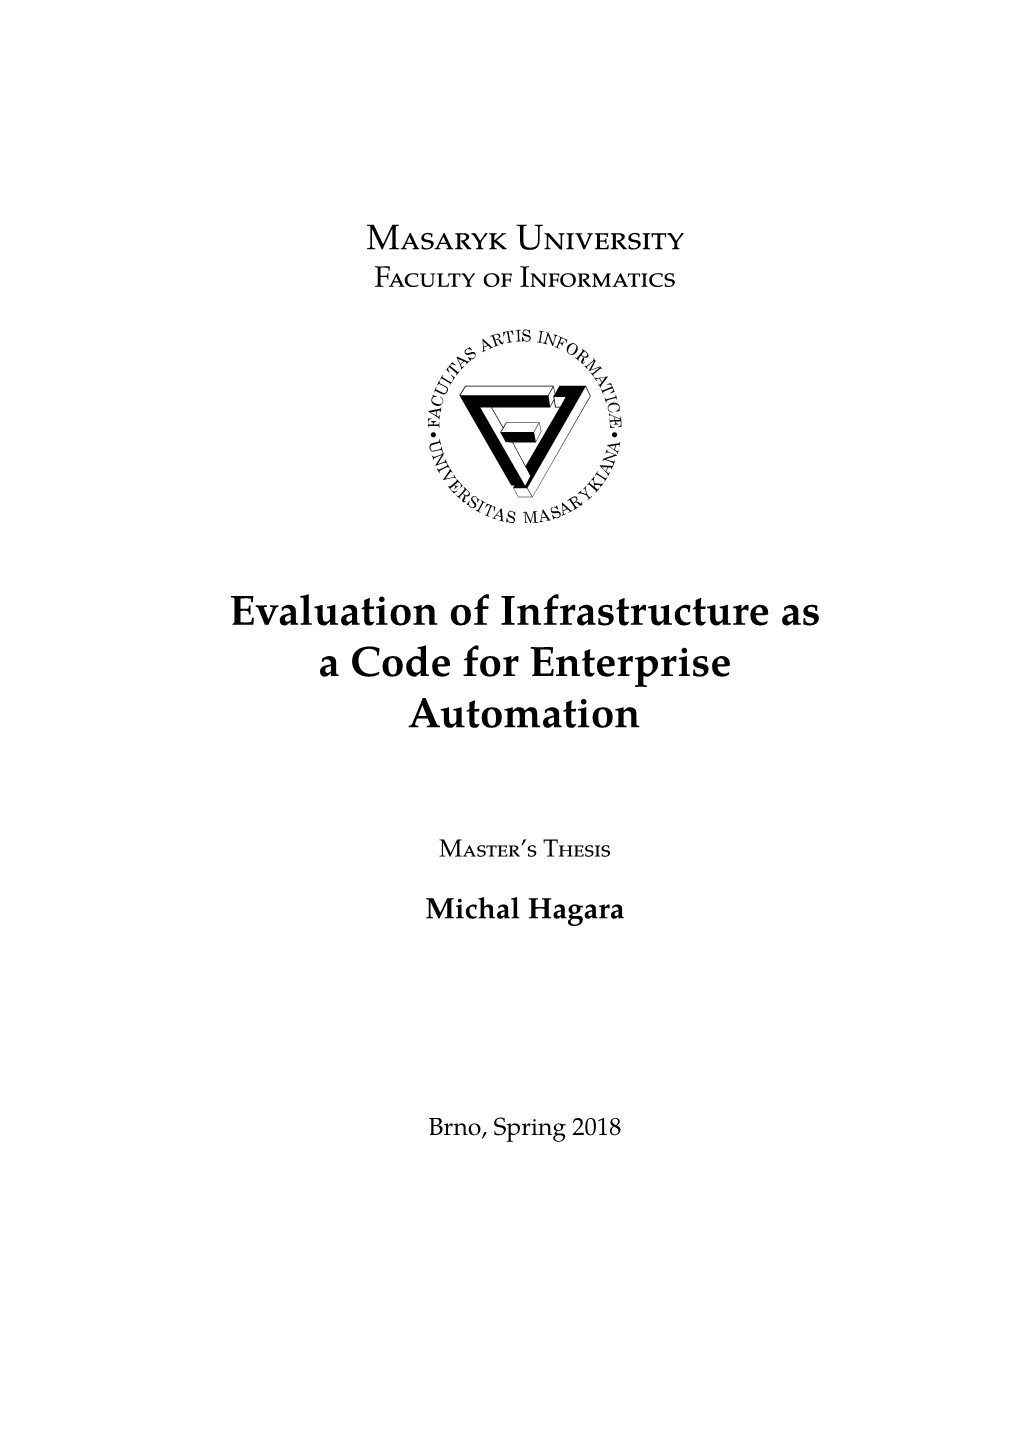 Evaluation of Infrastructure As a Code for Enterprise Automation